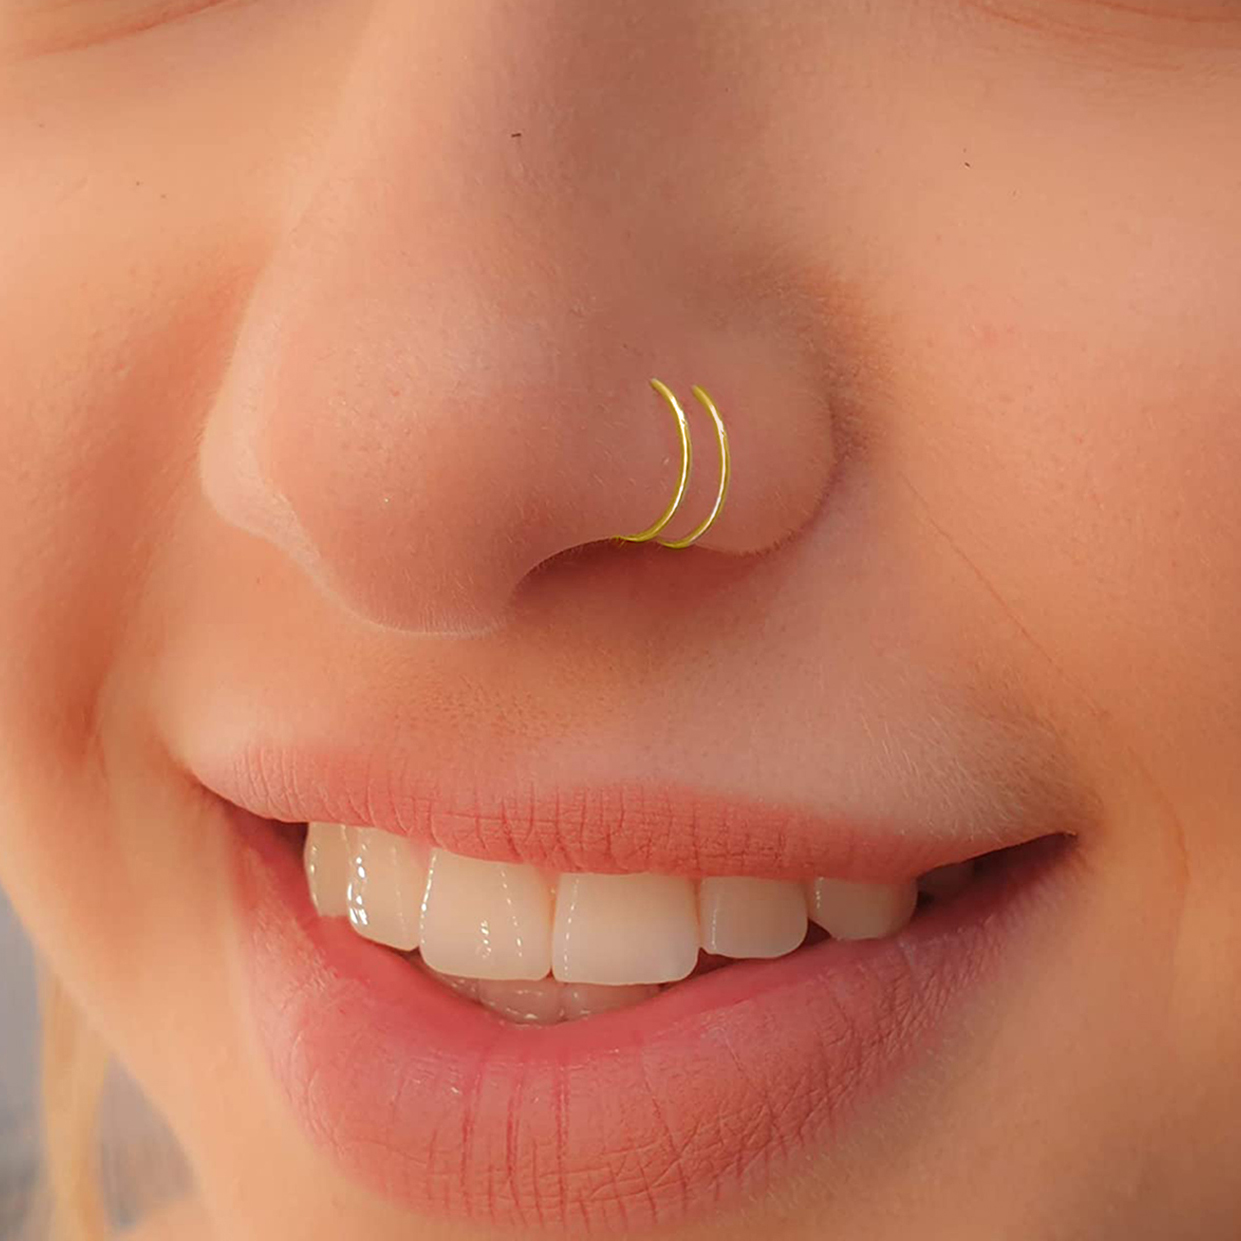 Solid Yellow Gold Nose Ring | Solid Gold Nose Jewelry | Gold Nose Hoop –  Rock Your Nose Jewelry Inc.